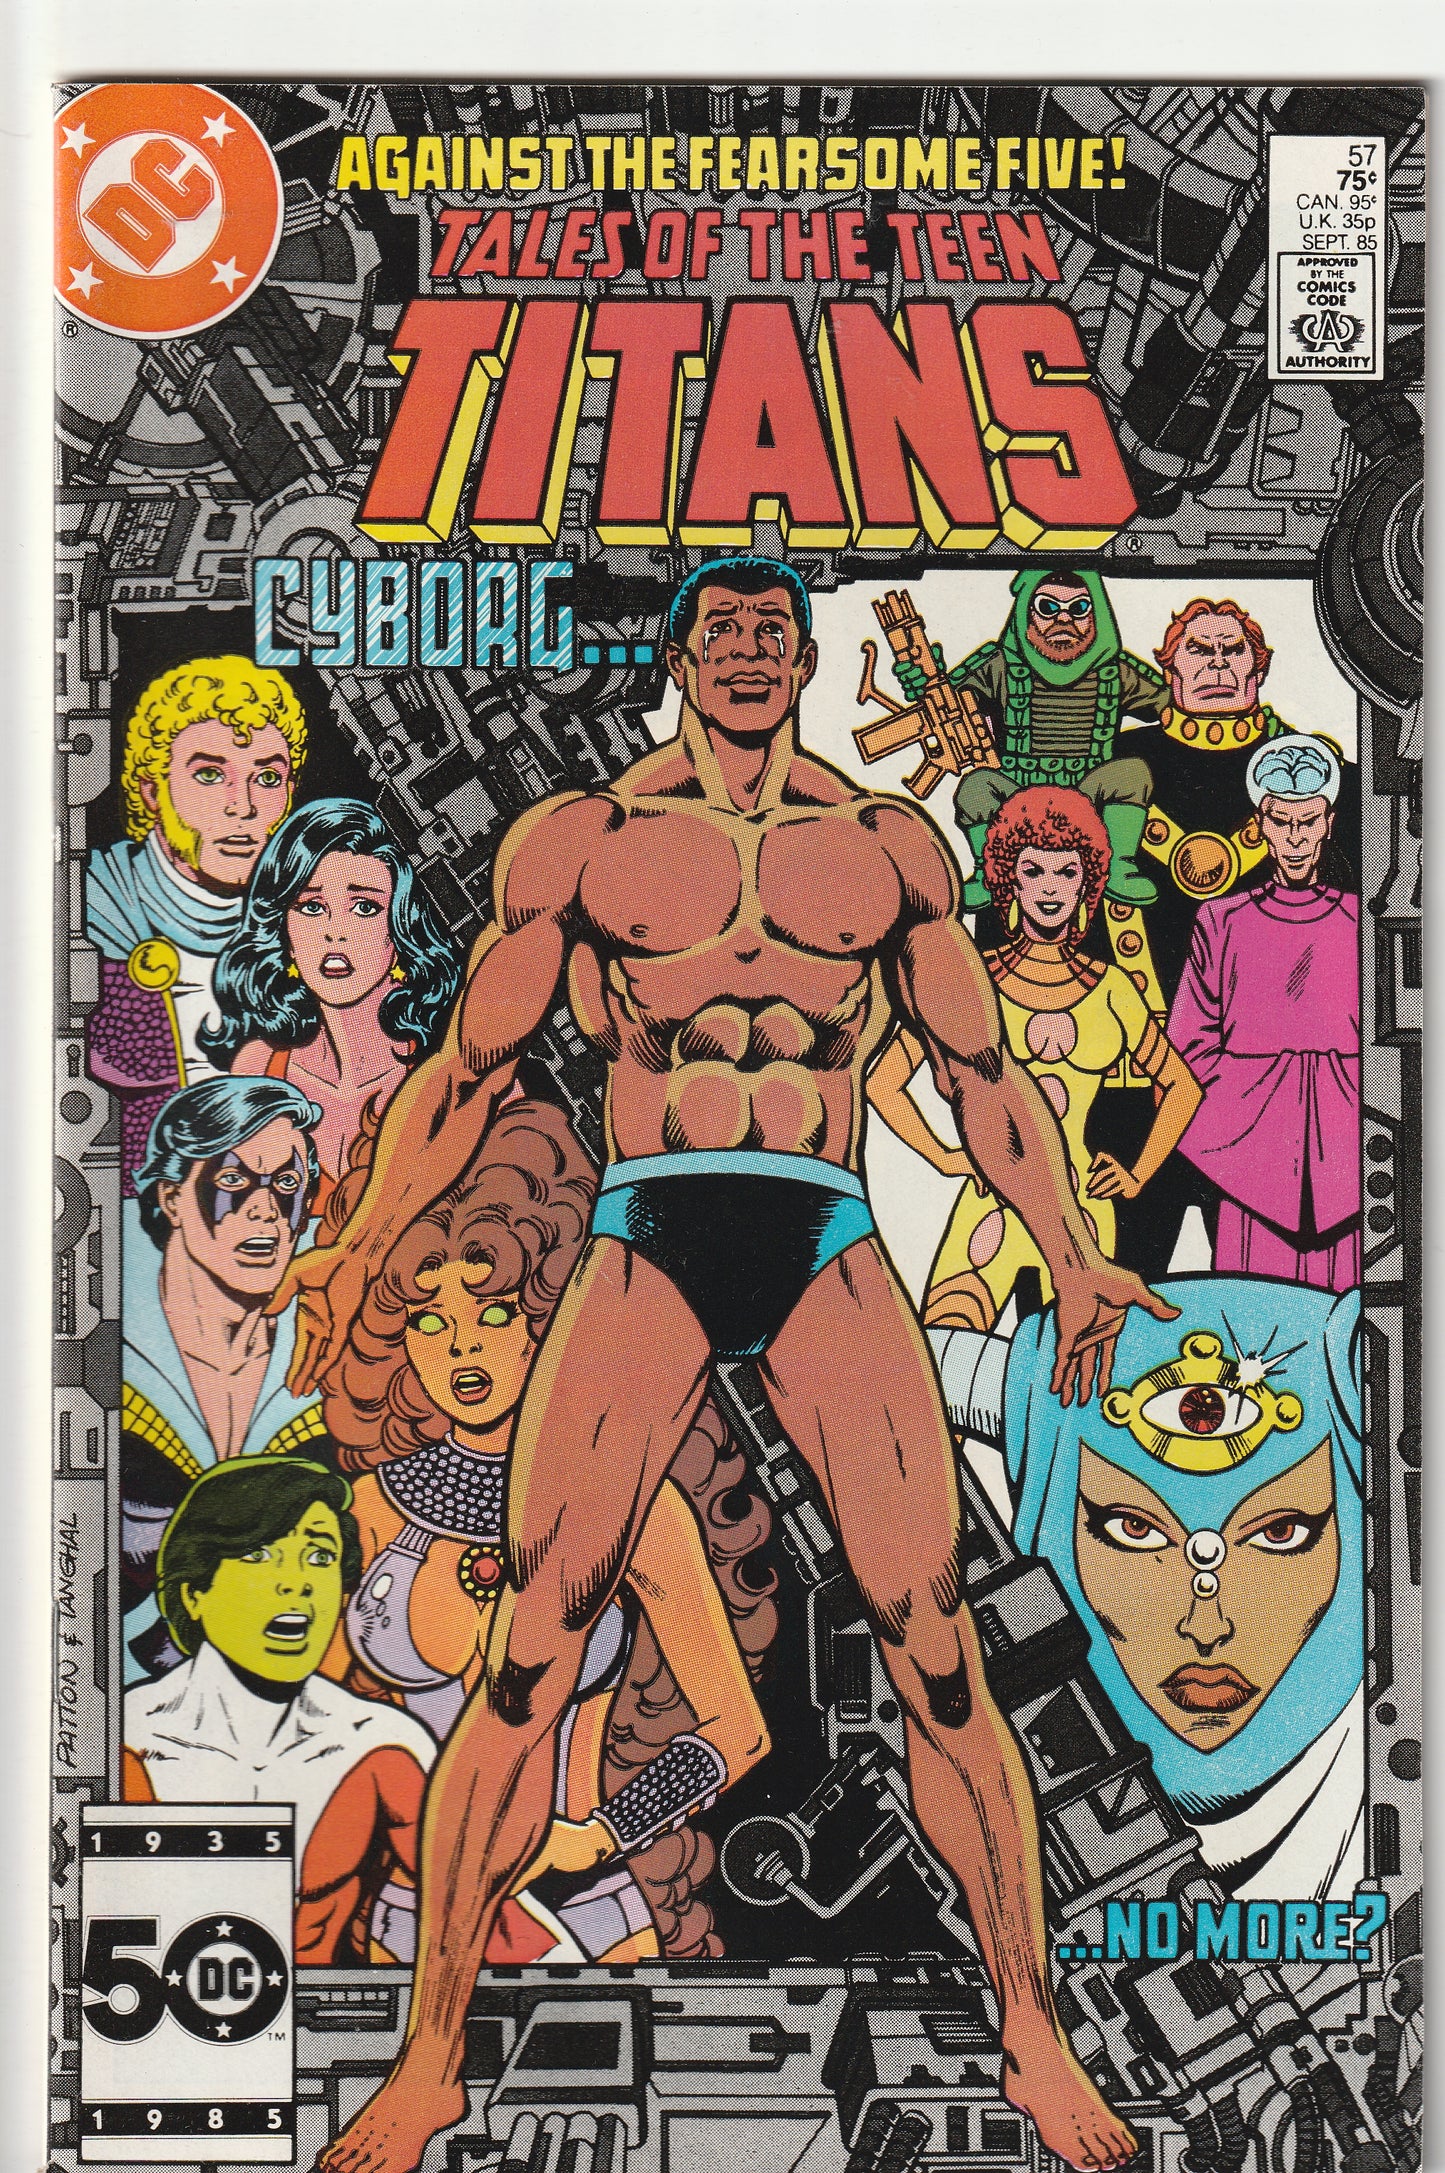 Tales of the Teen Titans #57 (1985) - 1st Full Appearance of Jinx